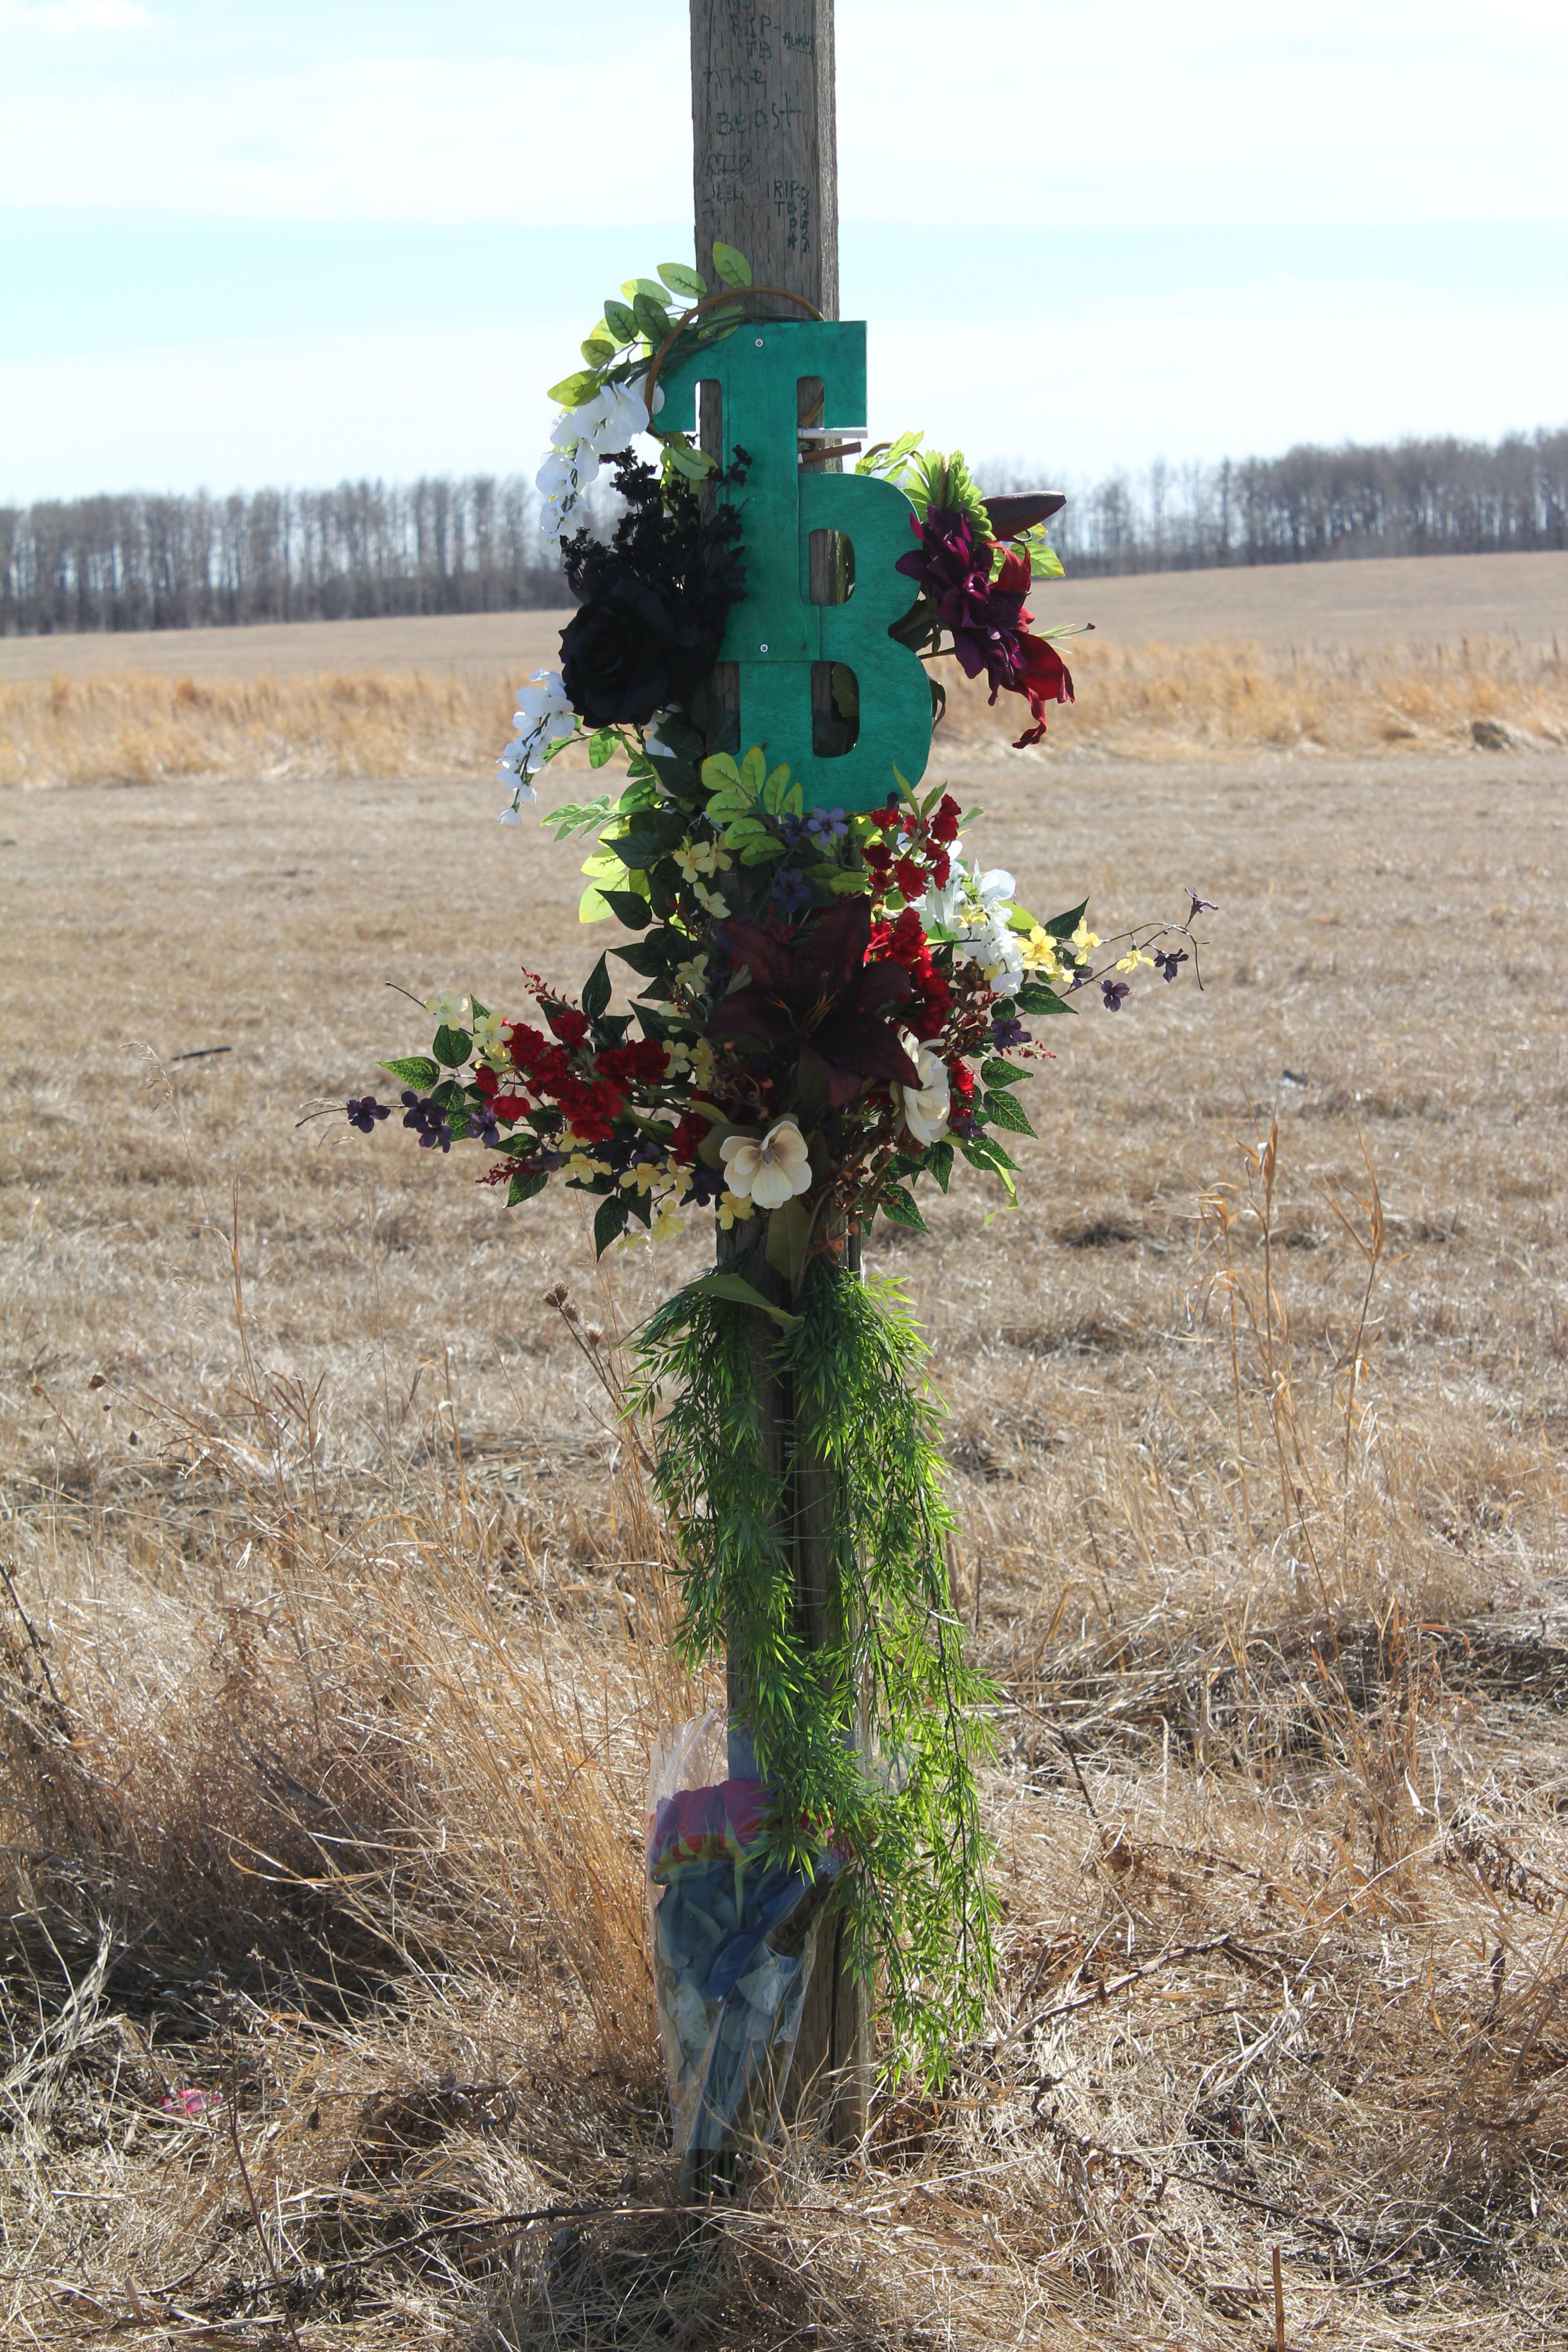 TRAGIC – A memorial has been set up at the site on Hwy. 11A where Colton Keeler